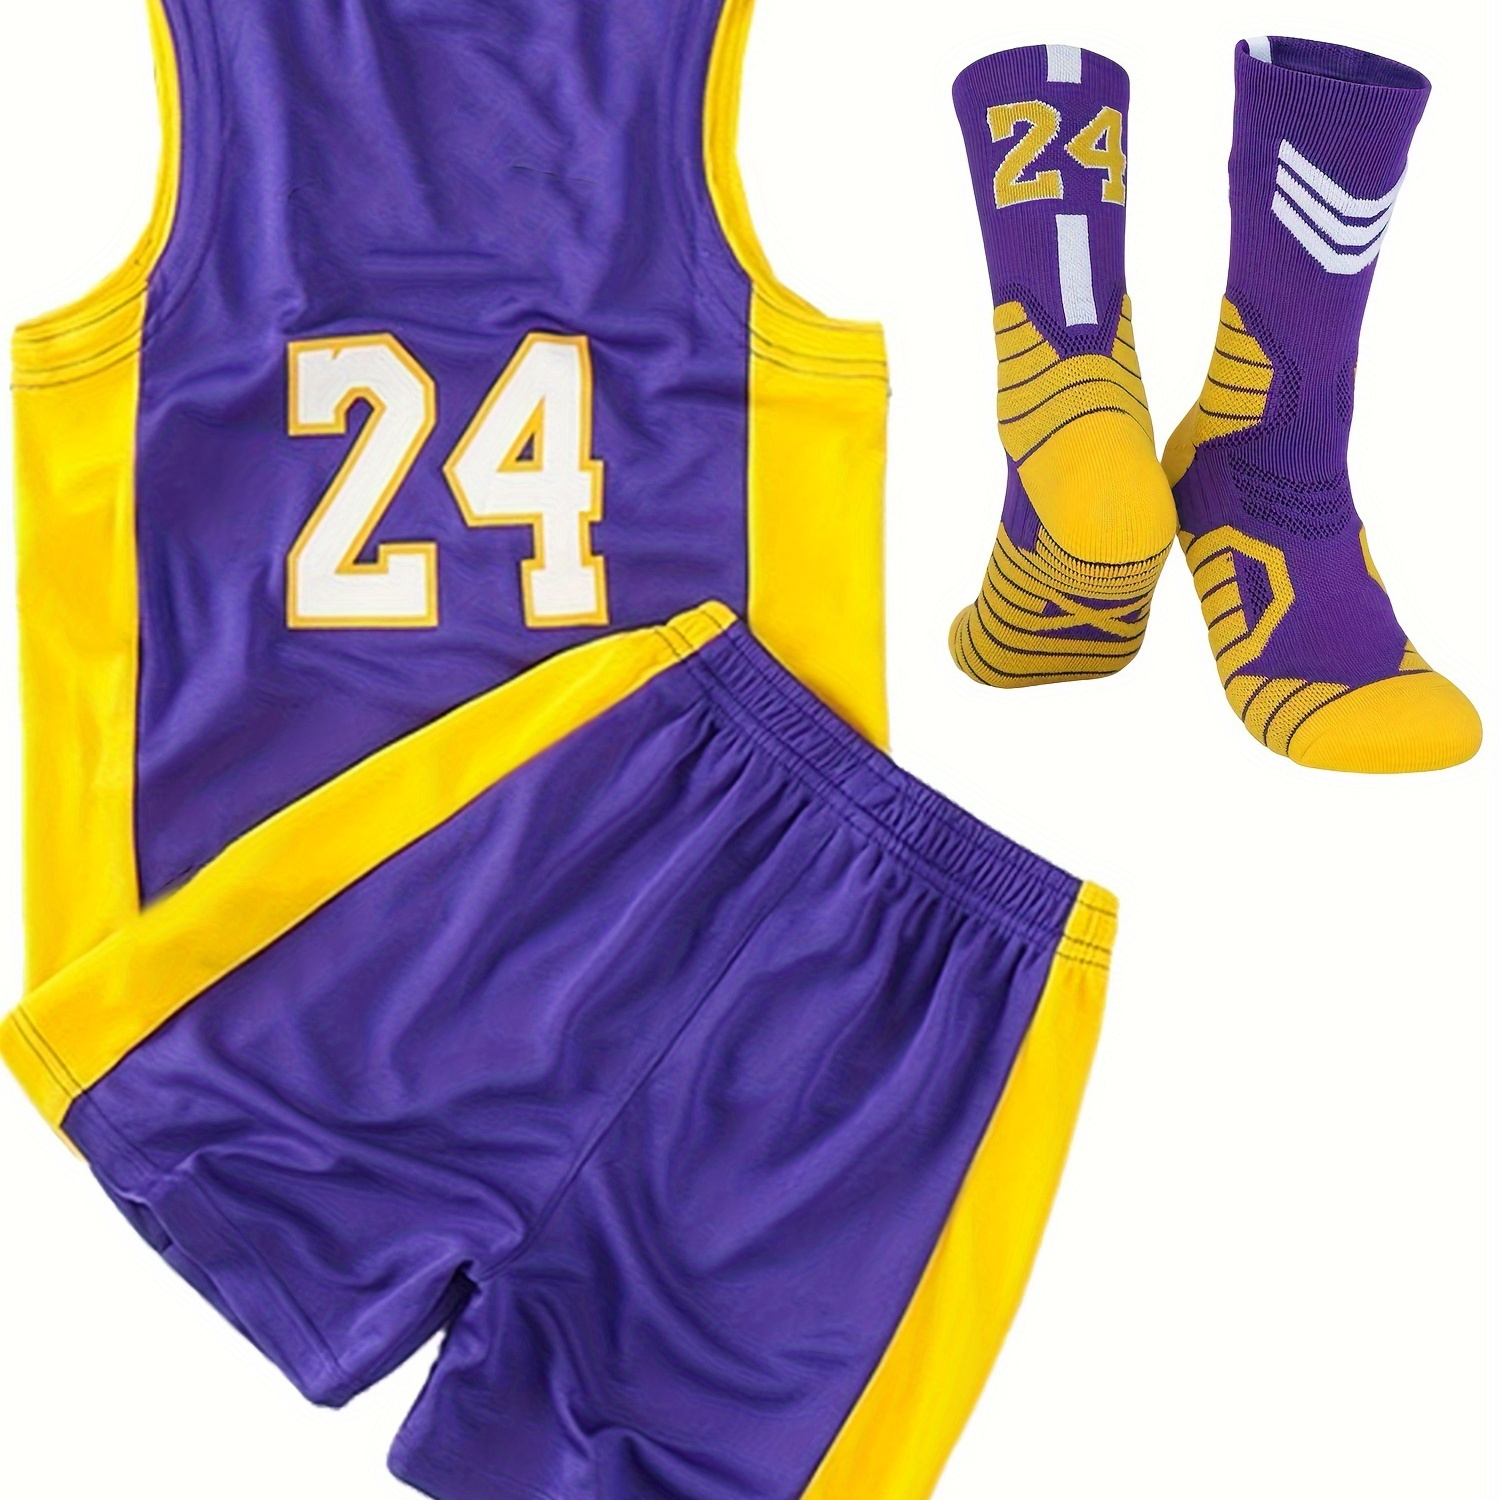 

Boys And Girls Basketball Jersey Set, Vest And Shorts With Socks 3pc 24#